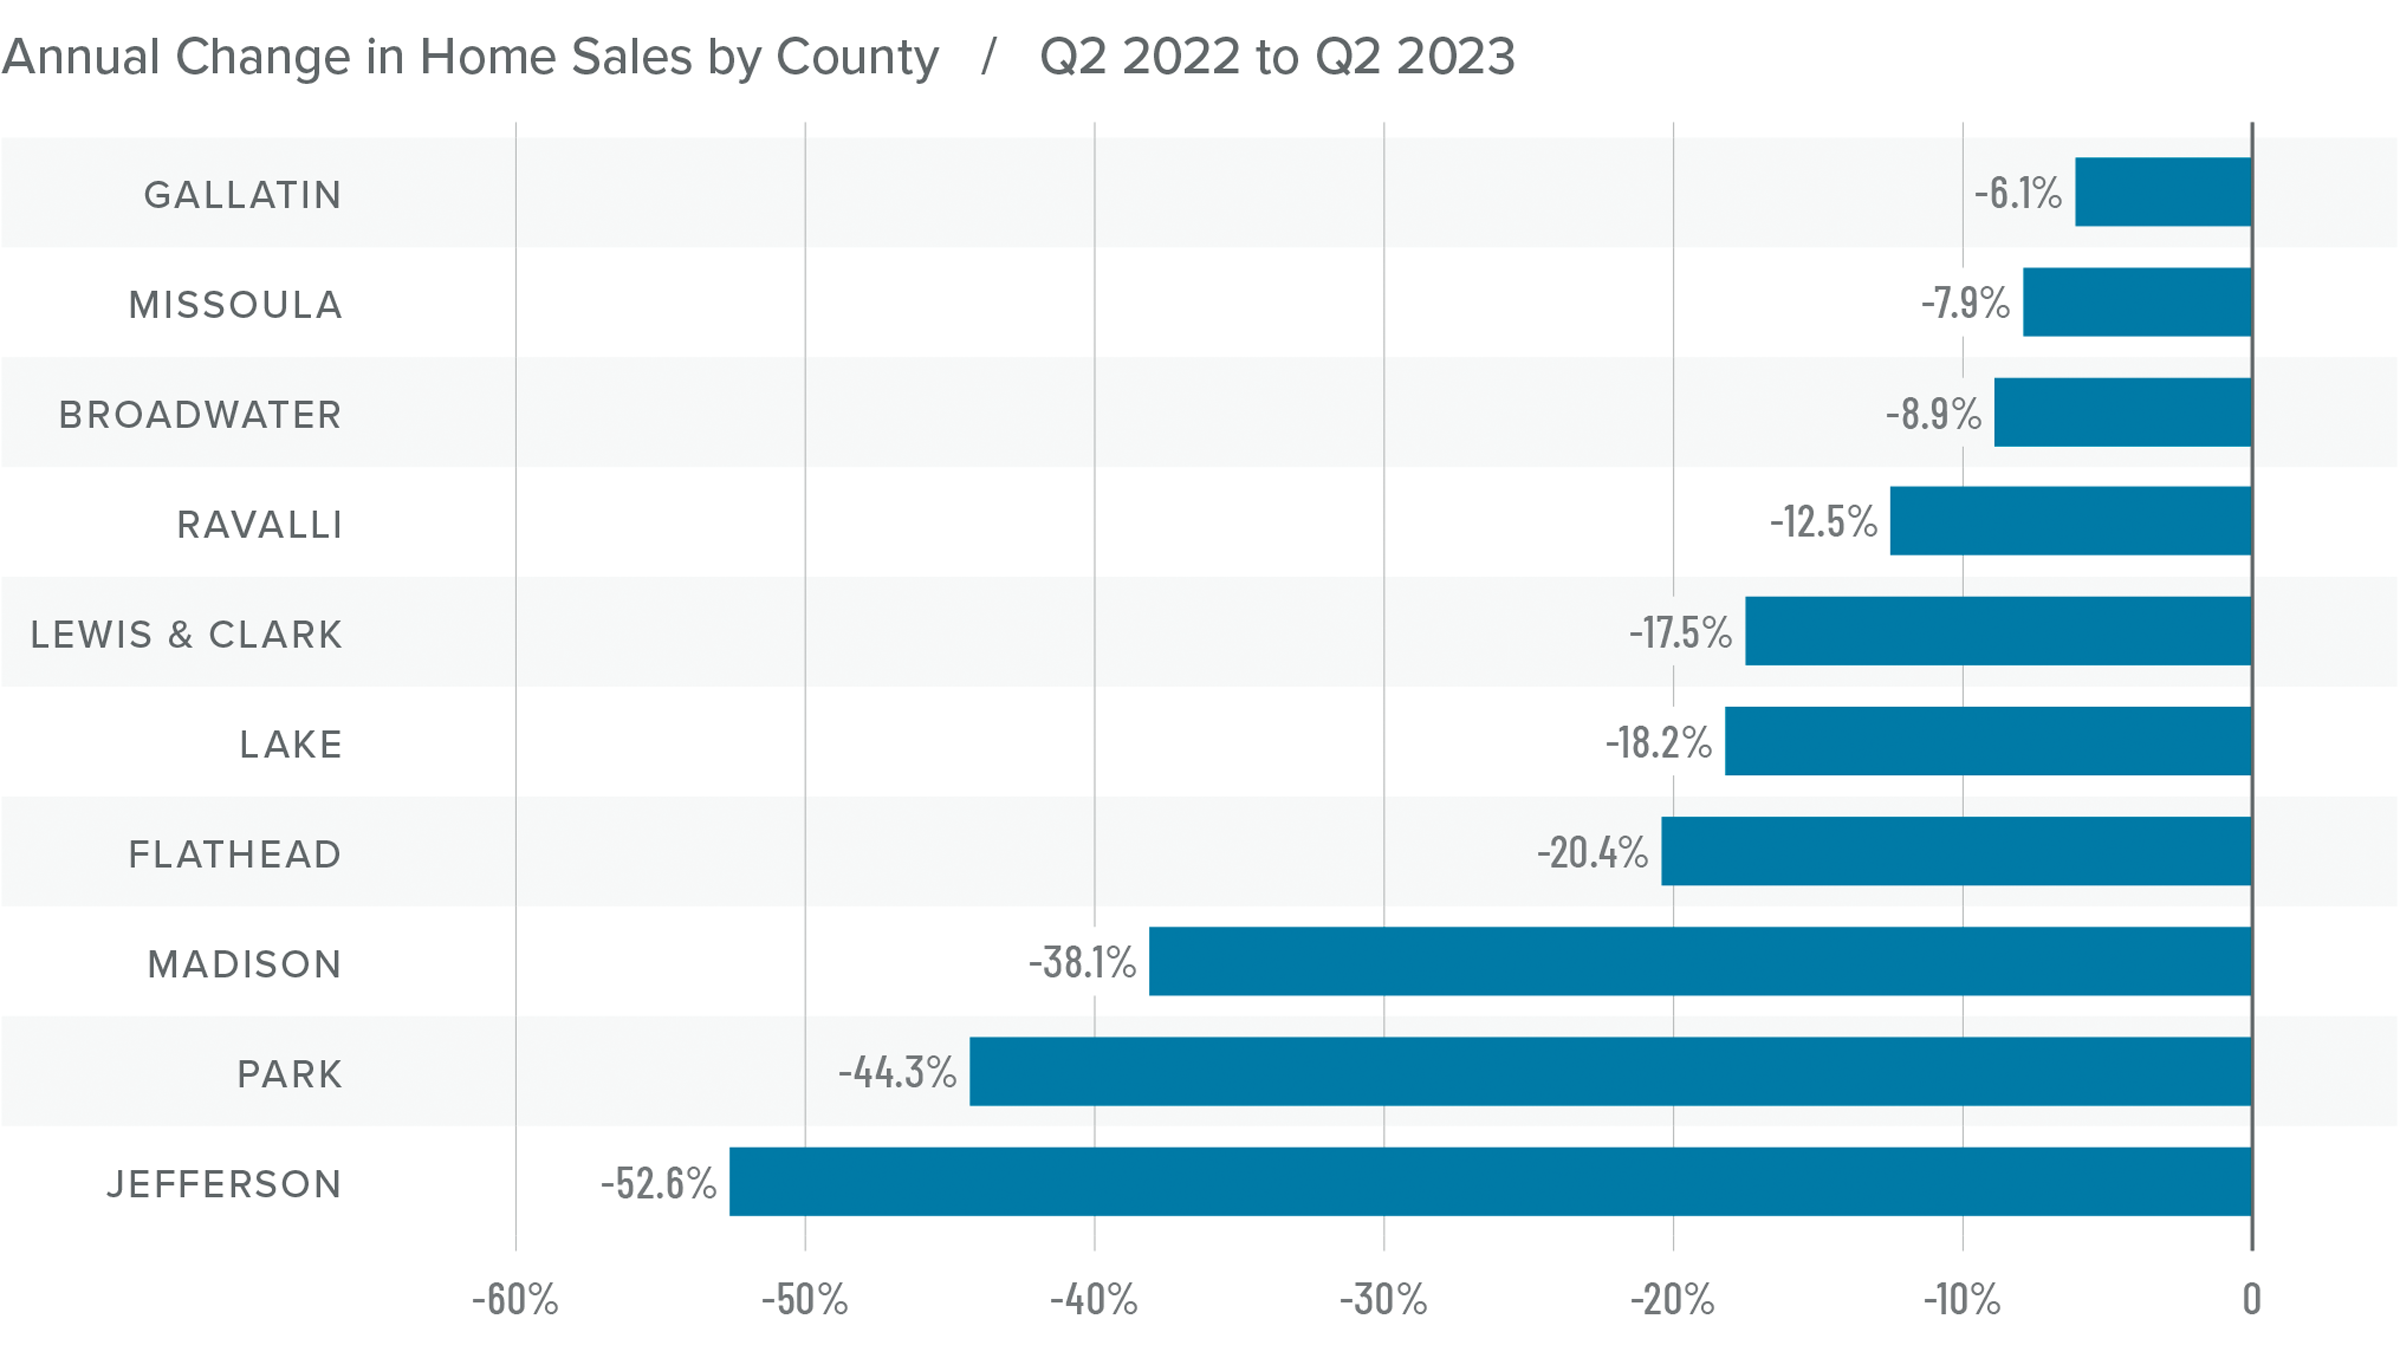 A graph showing the annual change in home sales by county for Montana from Q2 2022 to Q2 2023. Gallatin had the least drastic change at -6.1%, while Jefferson had the largest change at -52.6%. Counties like Ravalli and Lake were in the middle at around -17%.